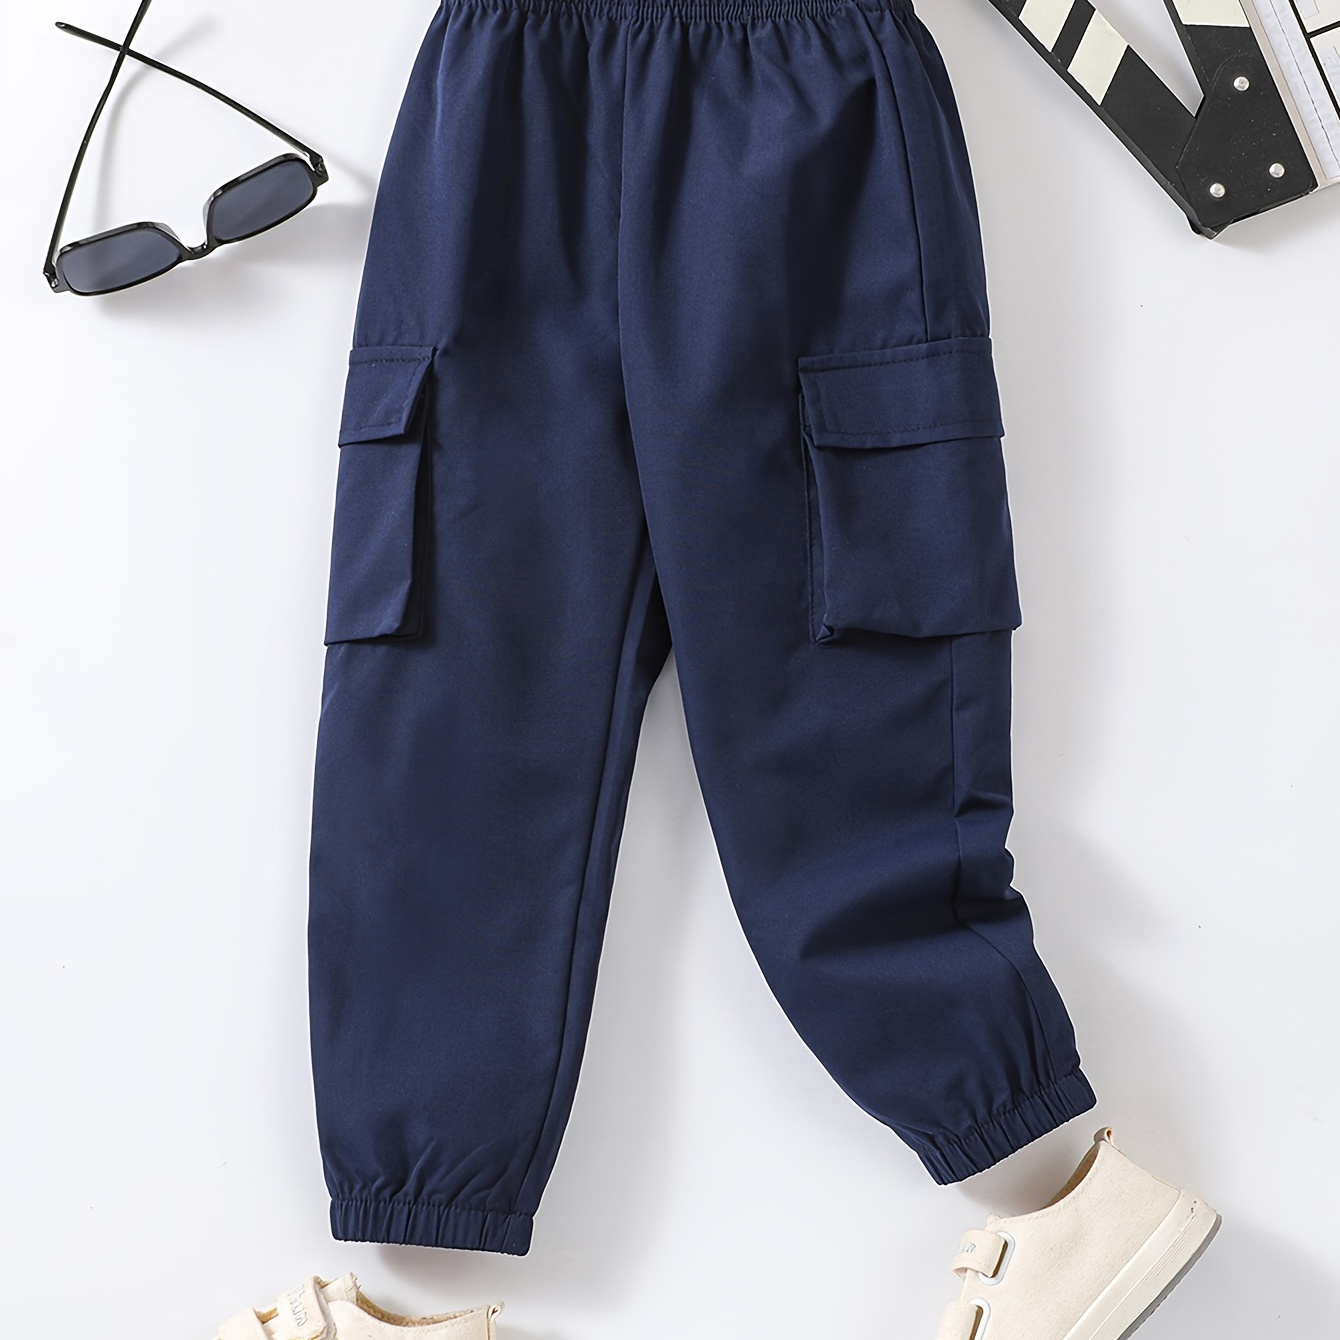 

Boys Casual Loose Cargo Pants, Elastic Waist Pants With Flap Pockets, Boys Clothes Outdoor